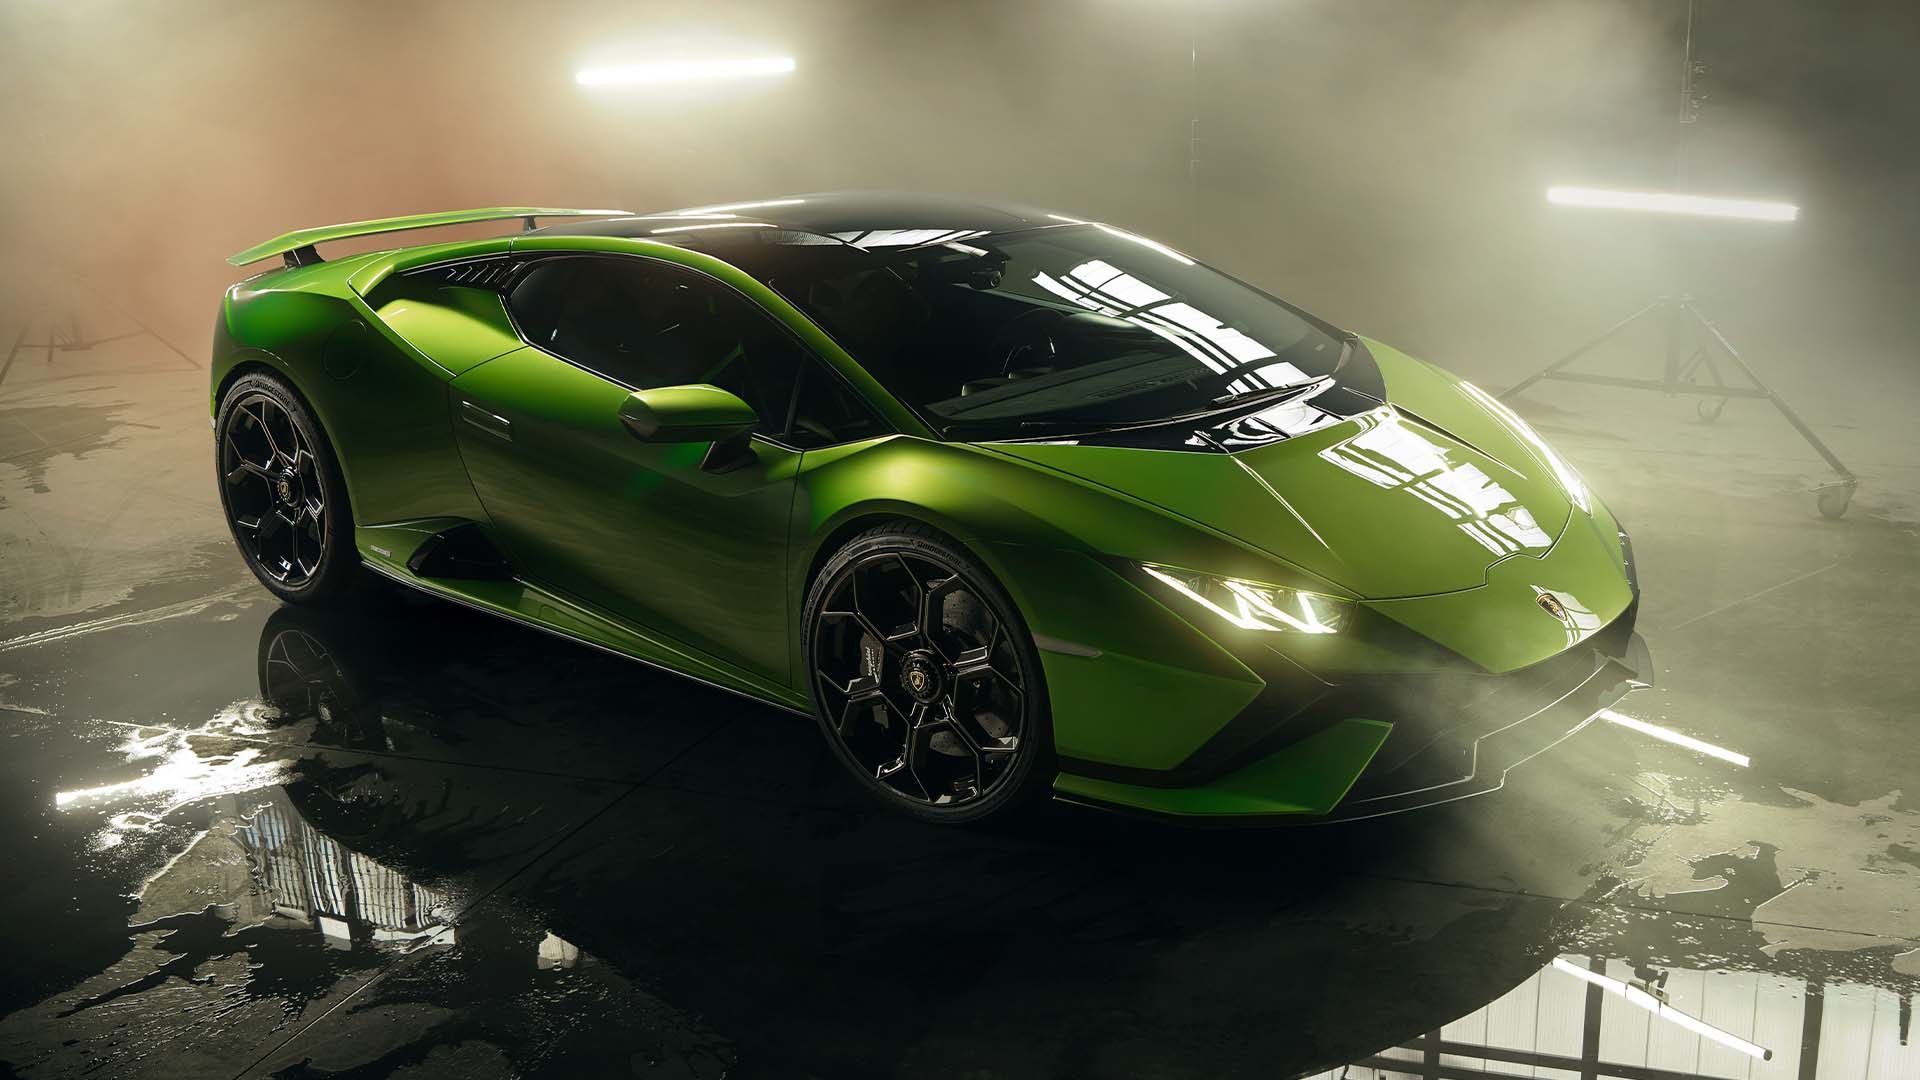 Electrified Lamborghinis Will Still Look Like 'Spaceships', Design Head Says